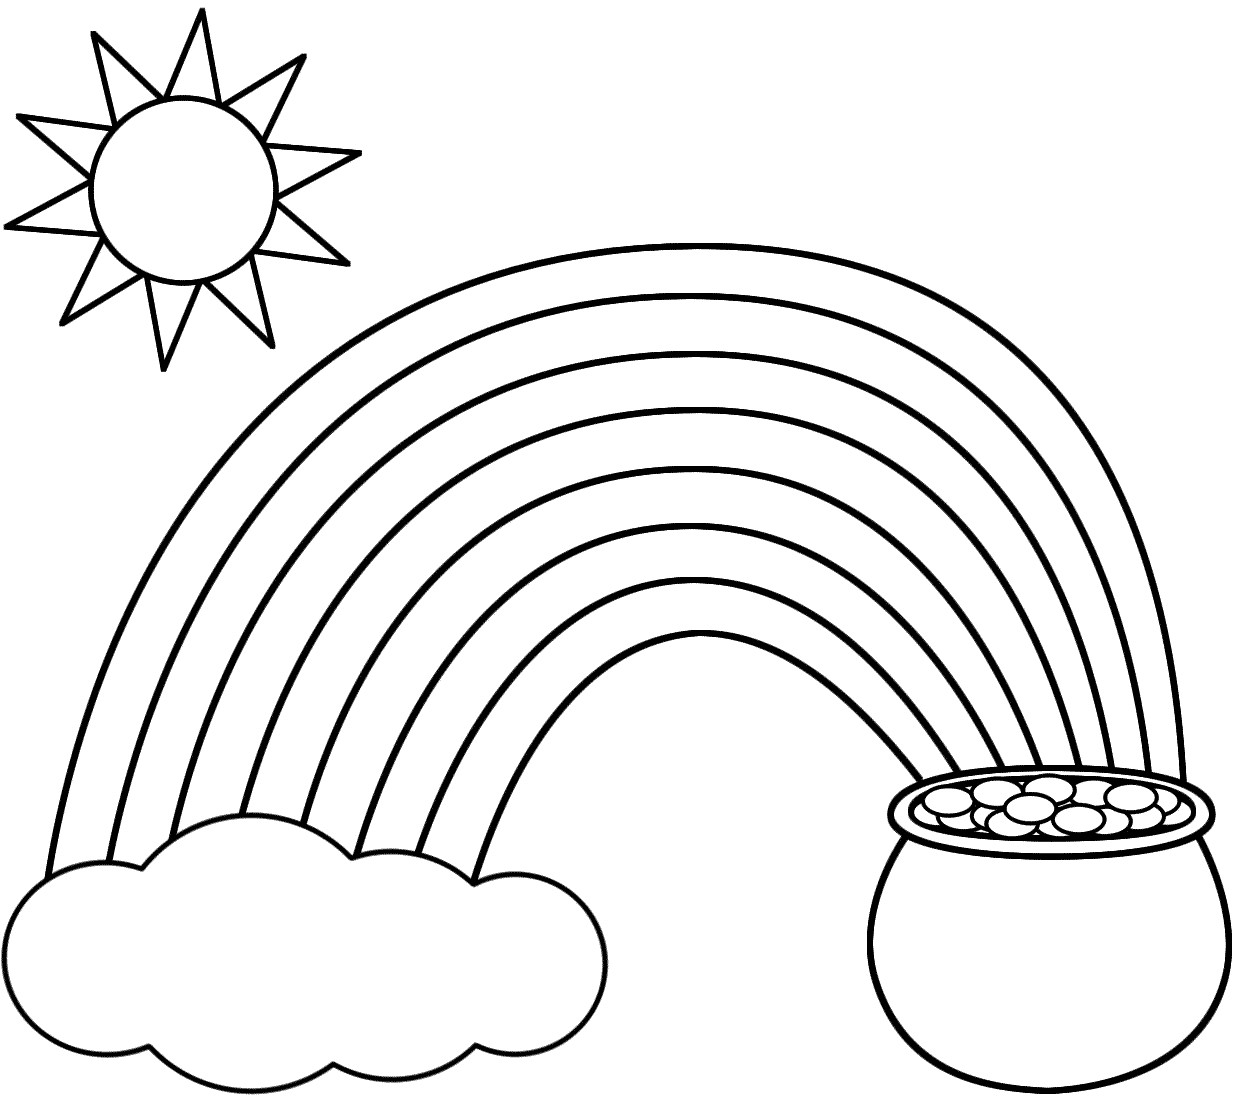 Printable Rainbow Coloring Sheet
 rainbow coloring pages for kids printable